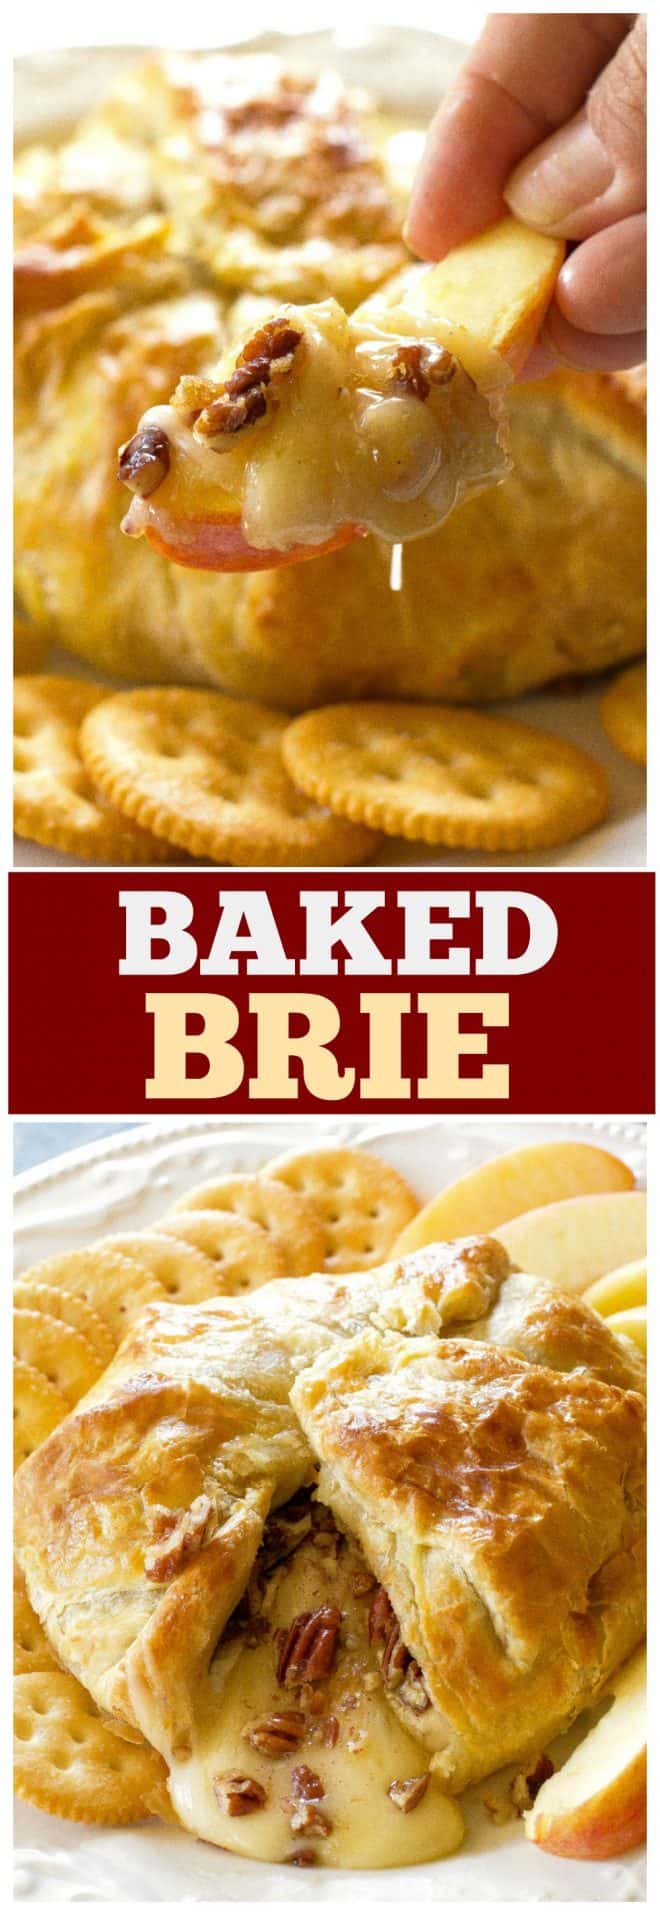 Baked Brie Appetizer Recipe - The Girl Who Ate Everything